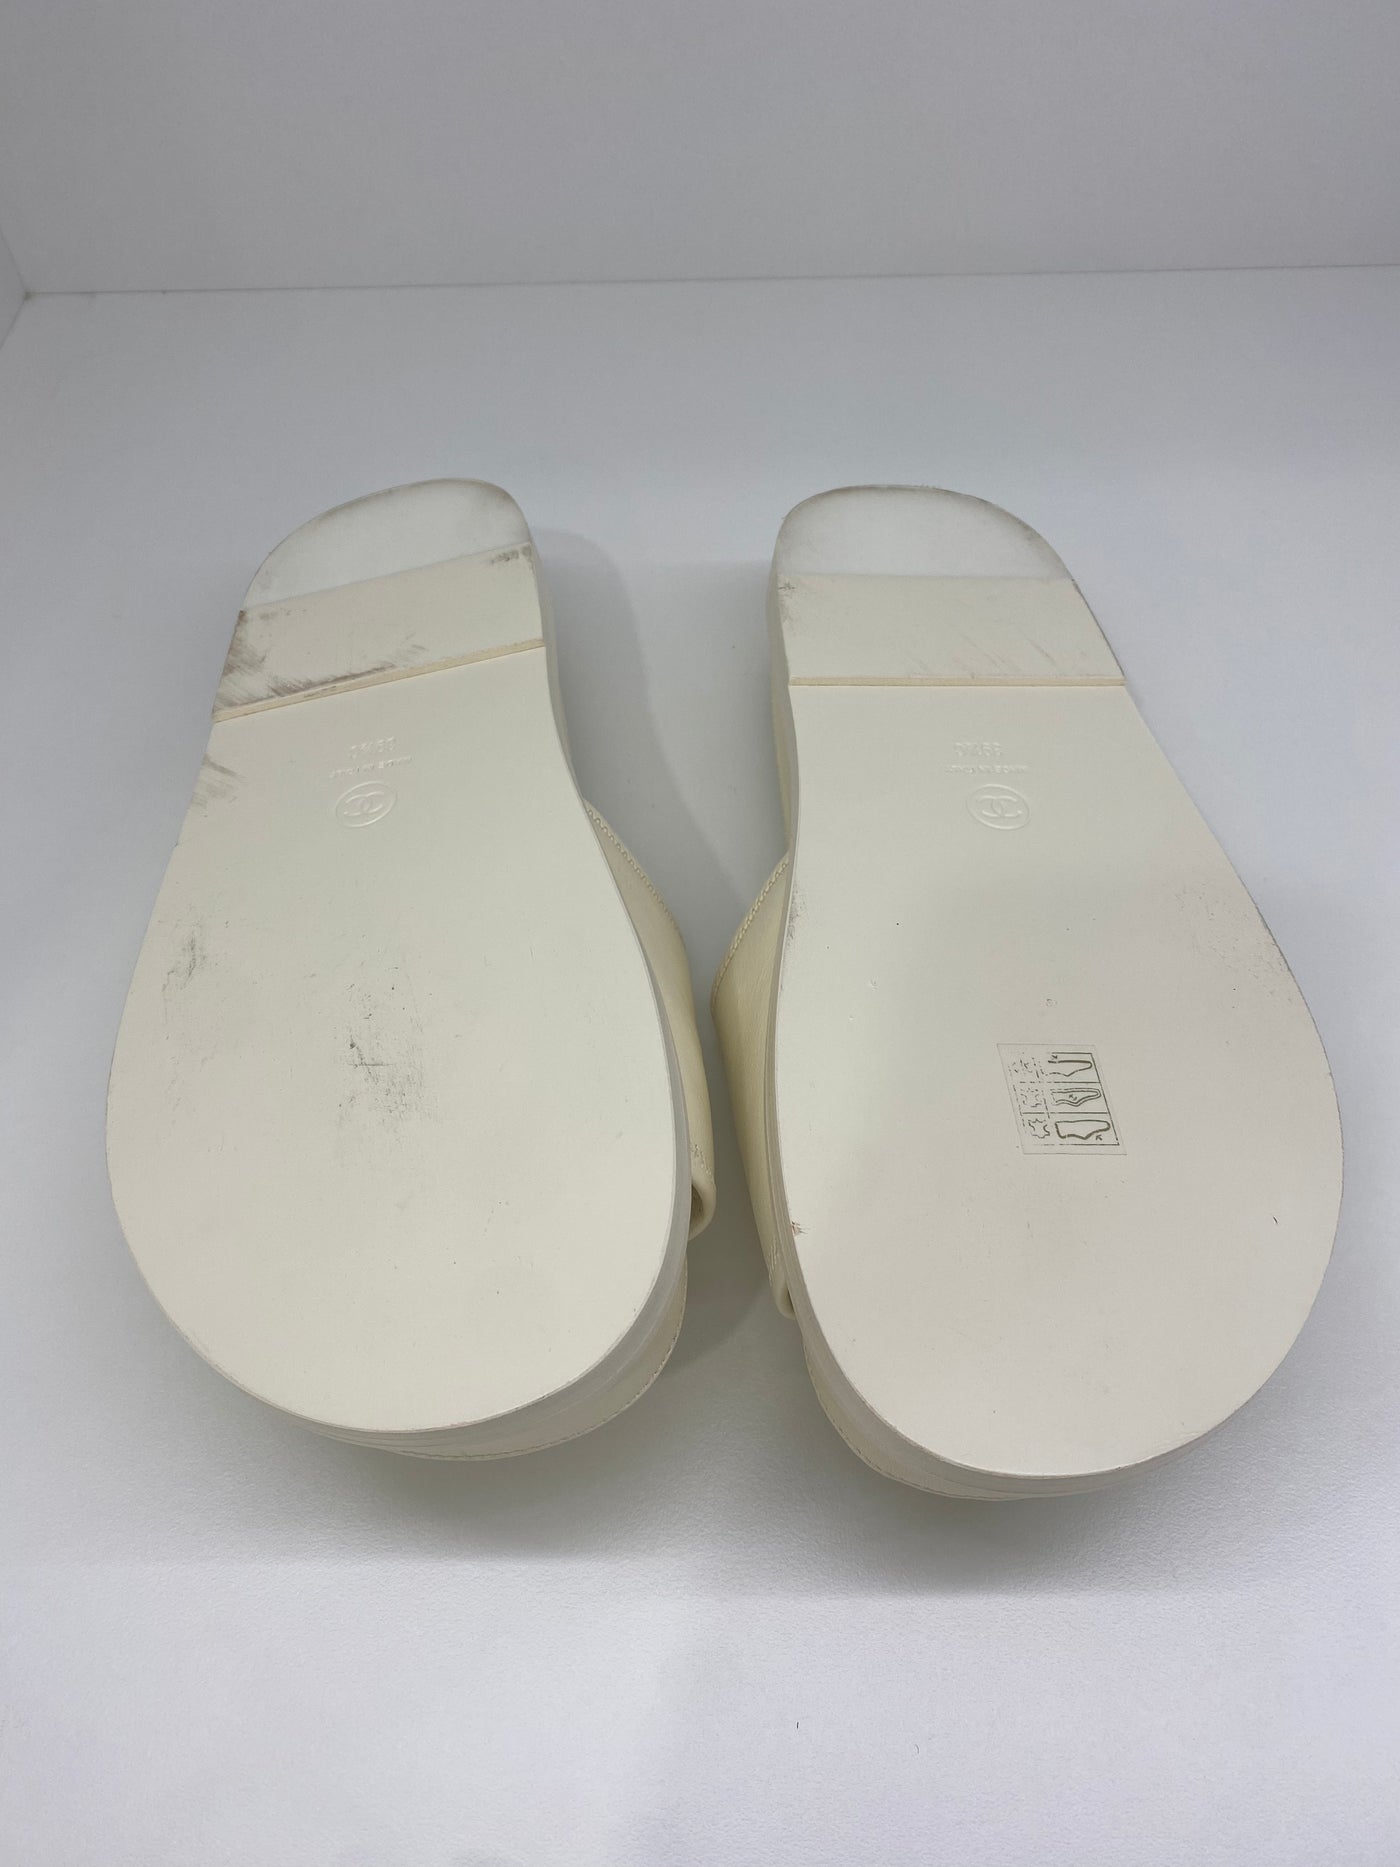 Chanel Rainbow and White Slides - Size 41 SOLD